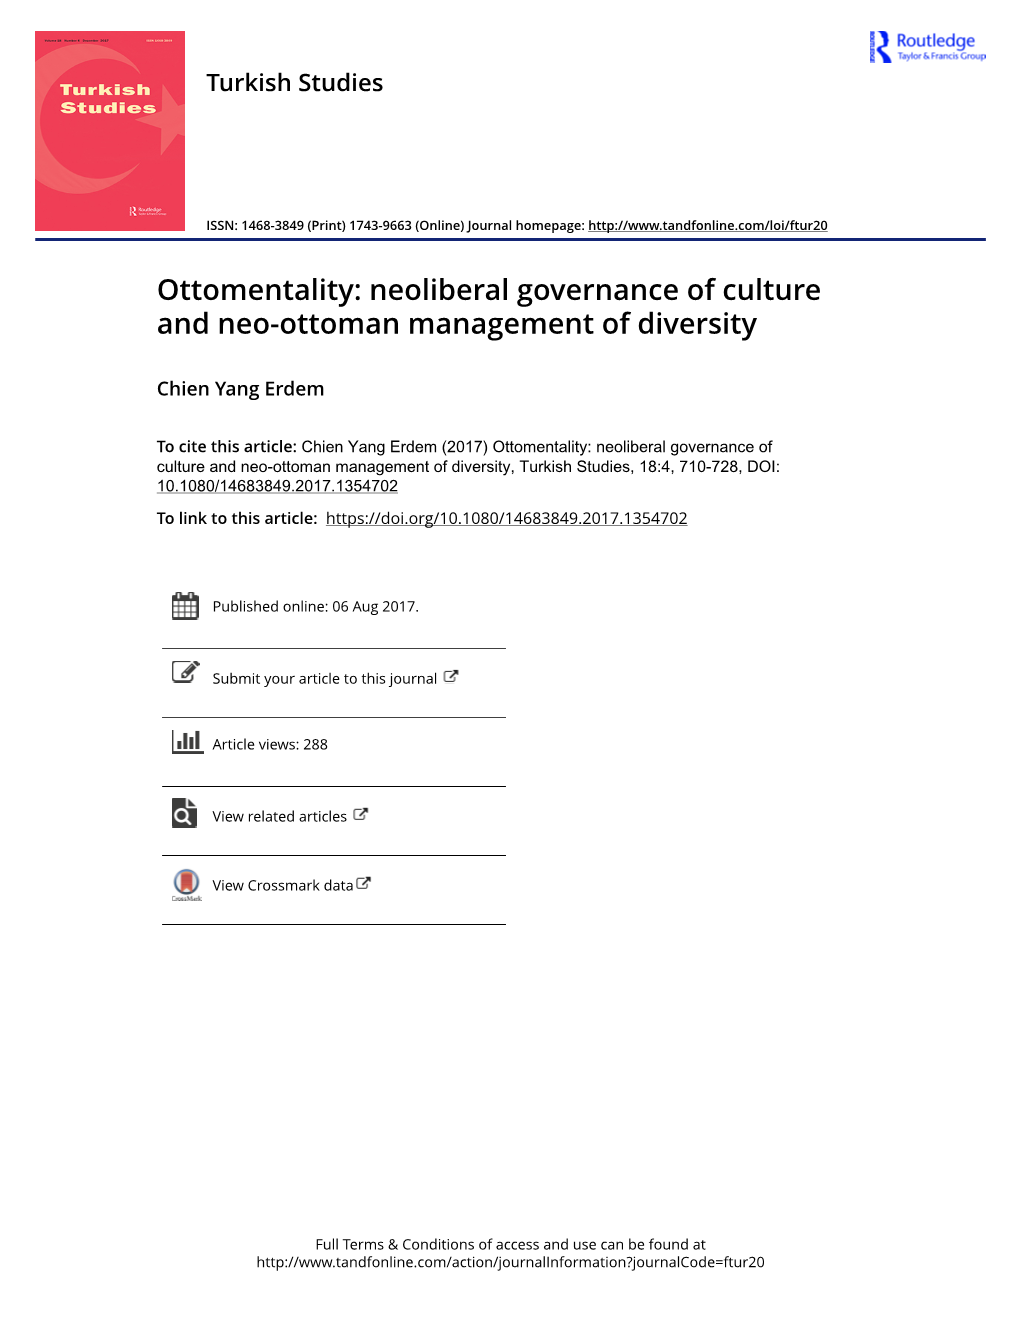 Neoliberal Governance of Culture and Neo-Ottoman Management of Diversity